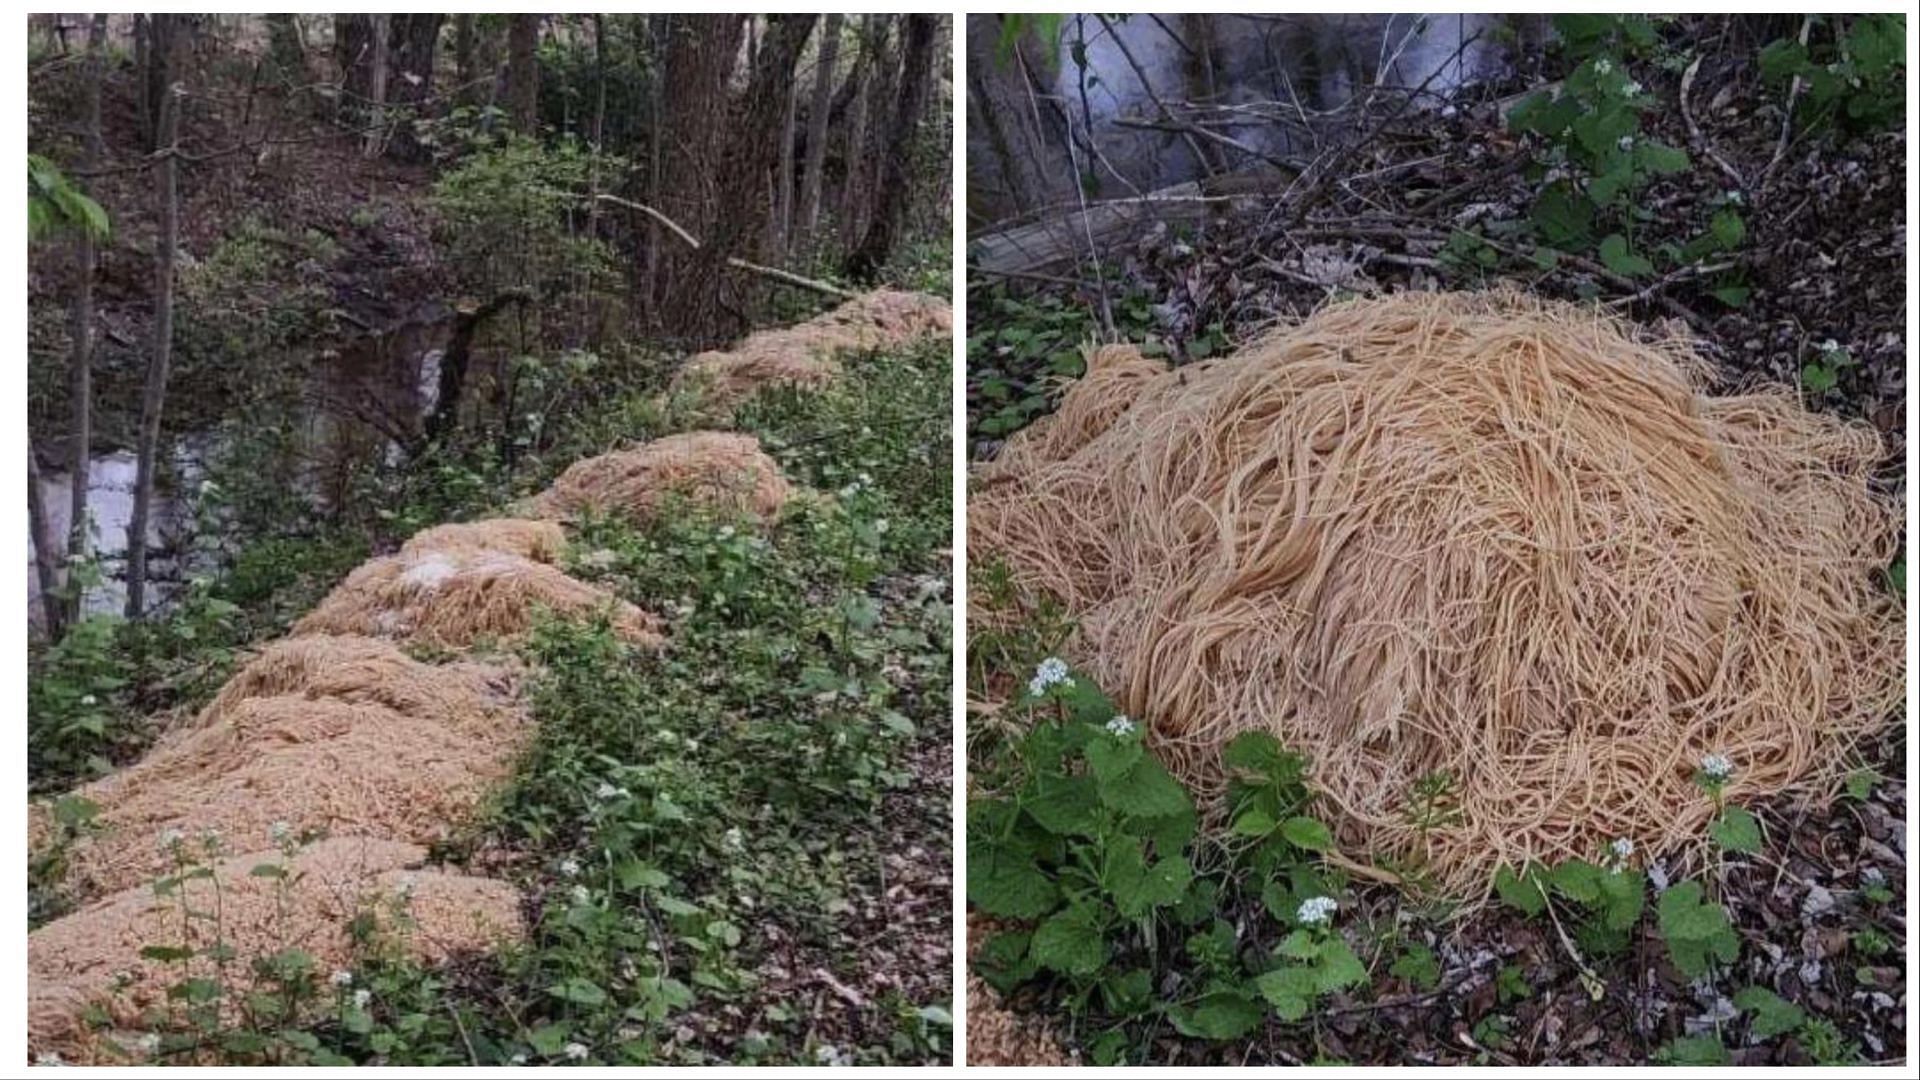 500 Pounds Of Pasta Found In The Woods In Old Bridge, New Jersey